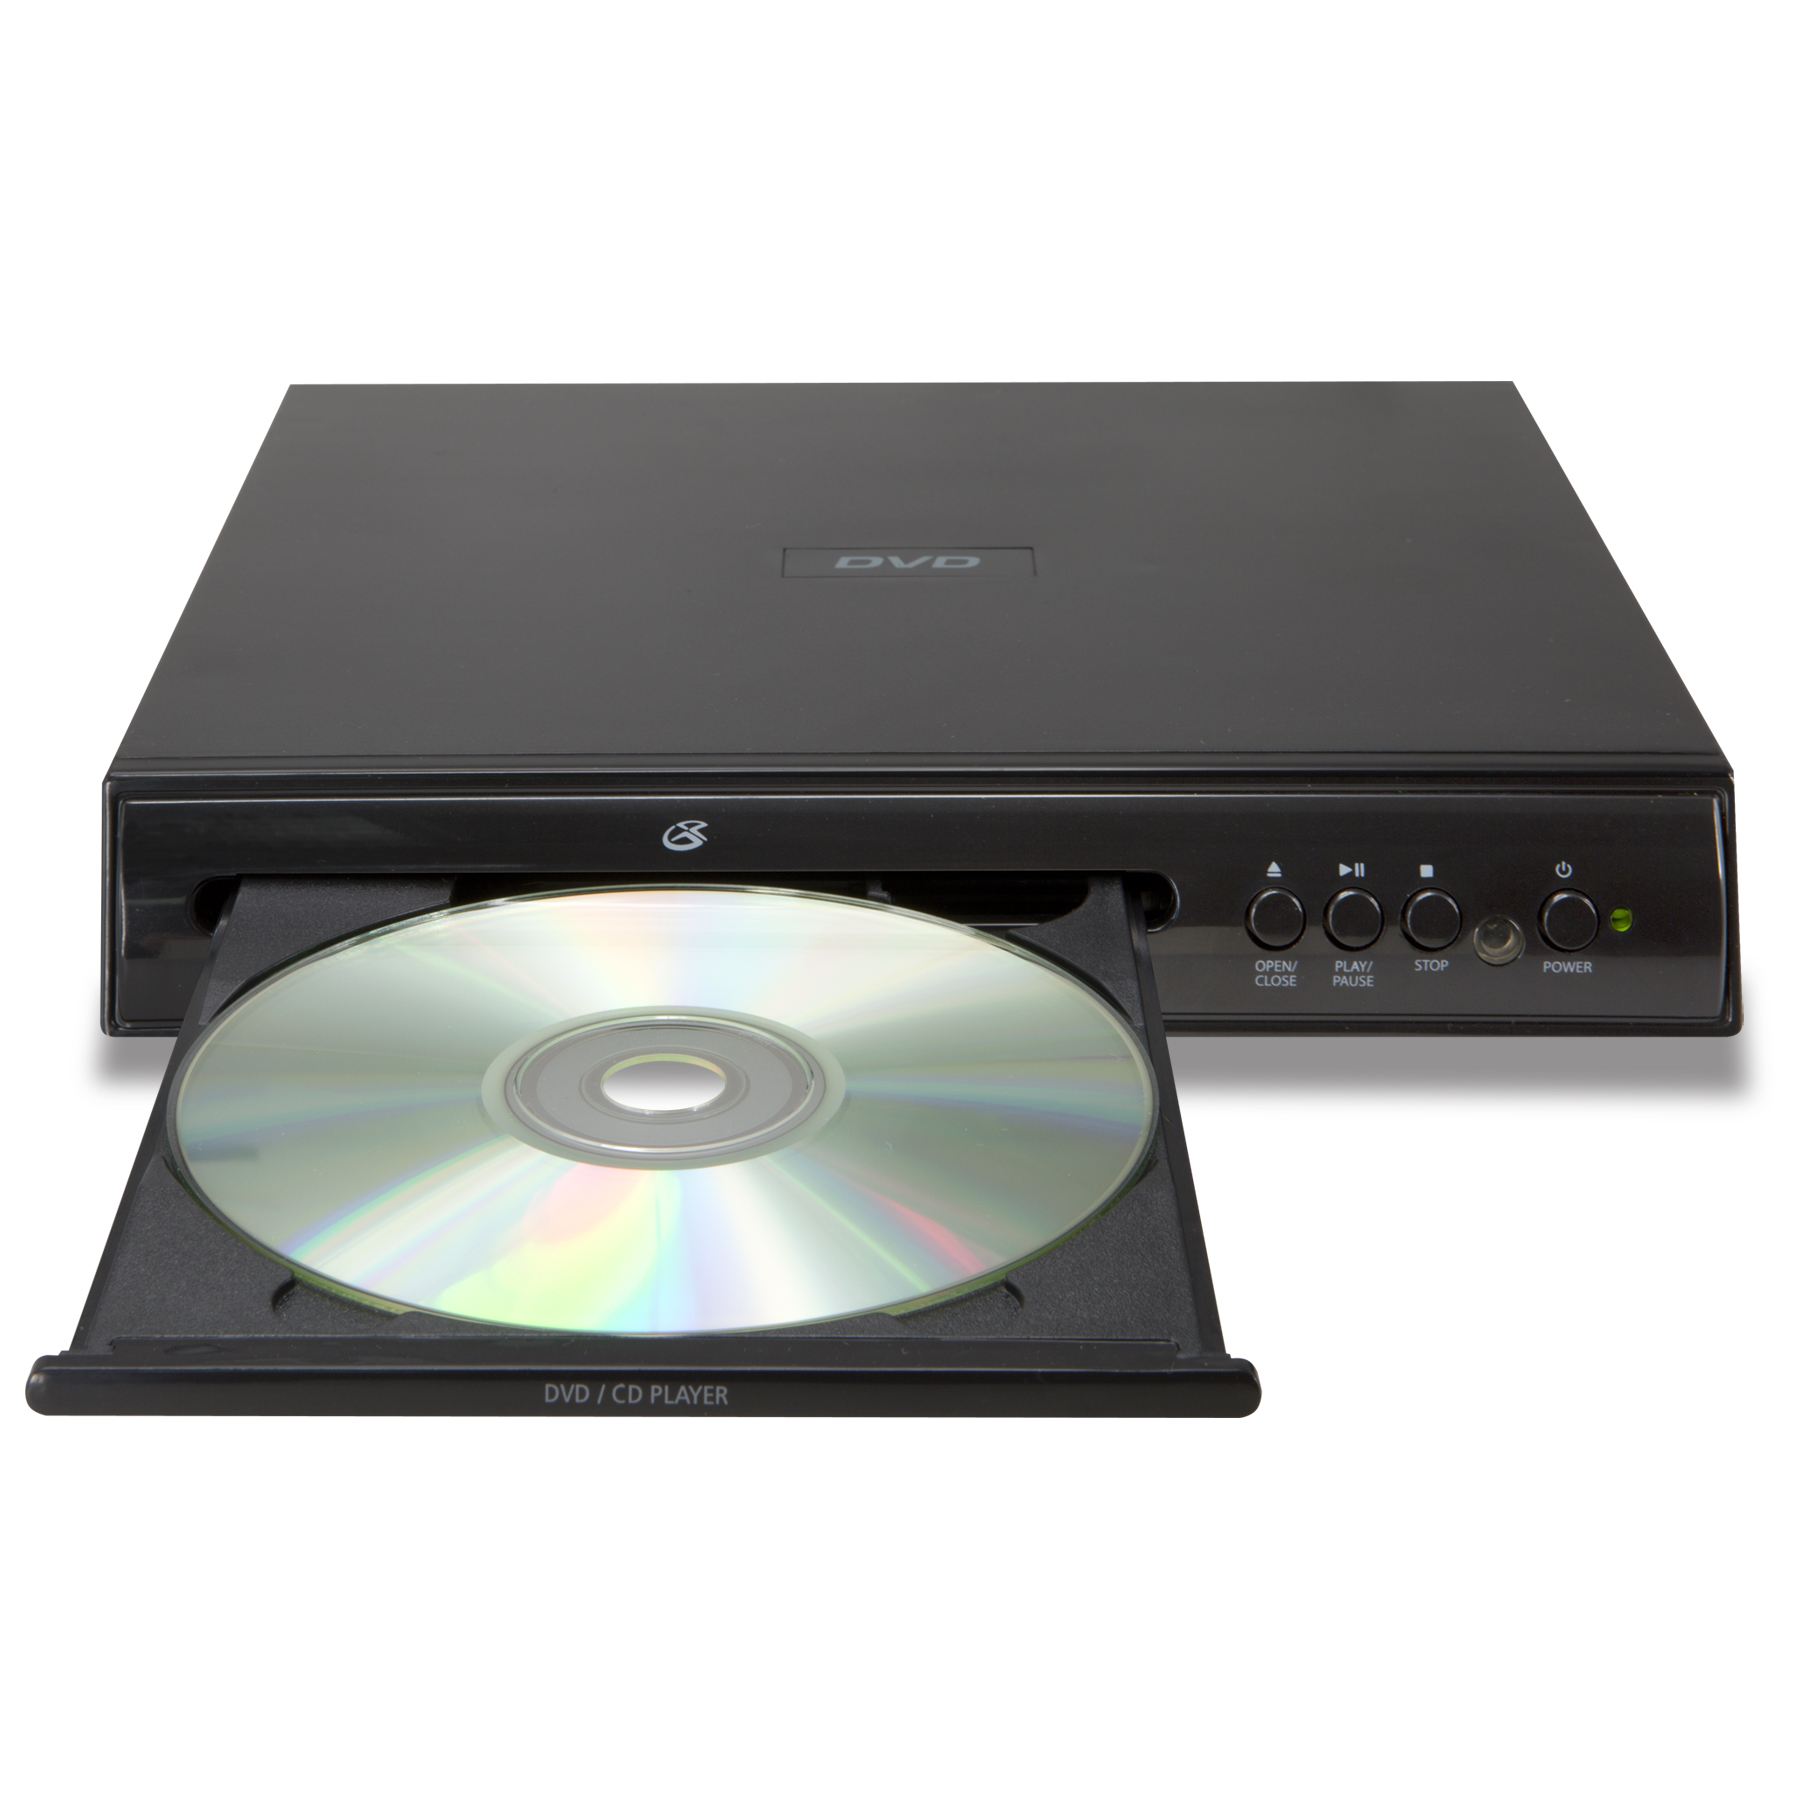 GPX D200B Progressive Scan DVD Player with Remote, Black - image 2 of 5